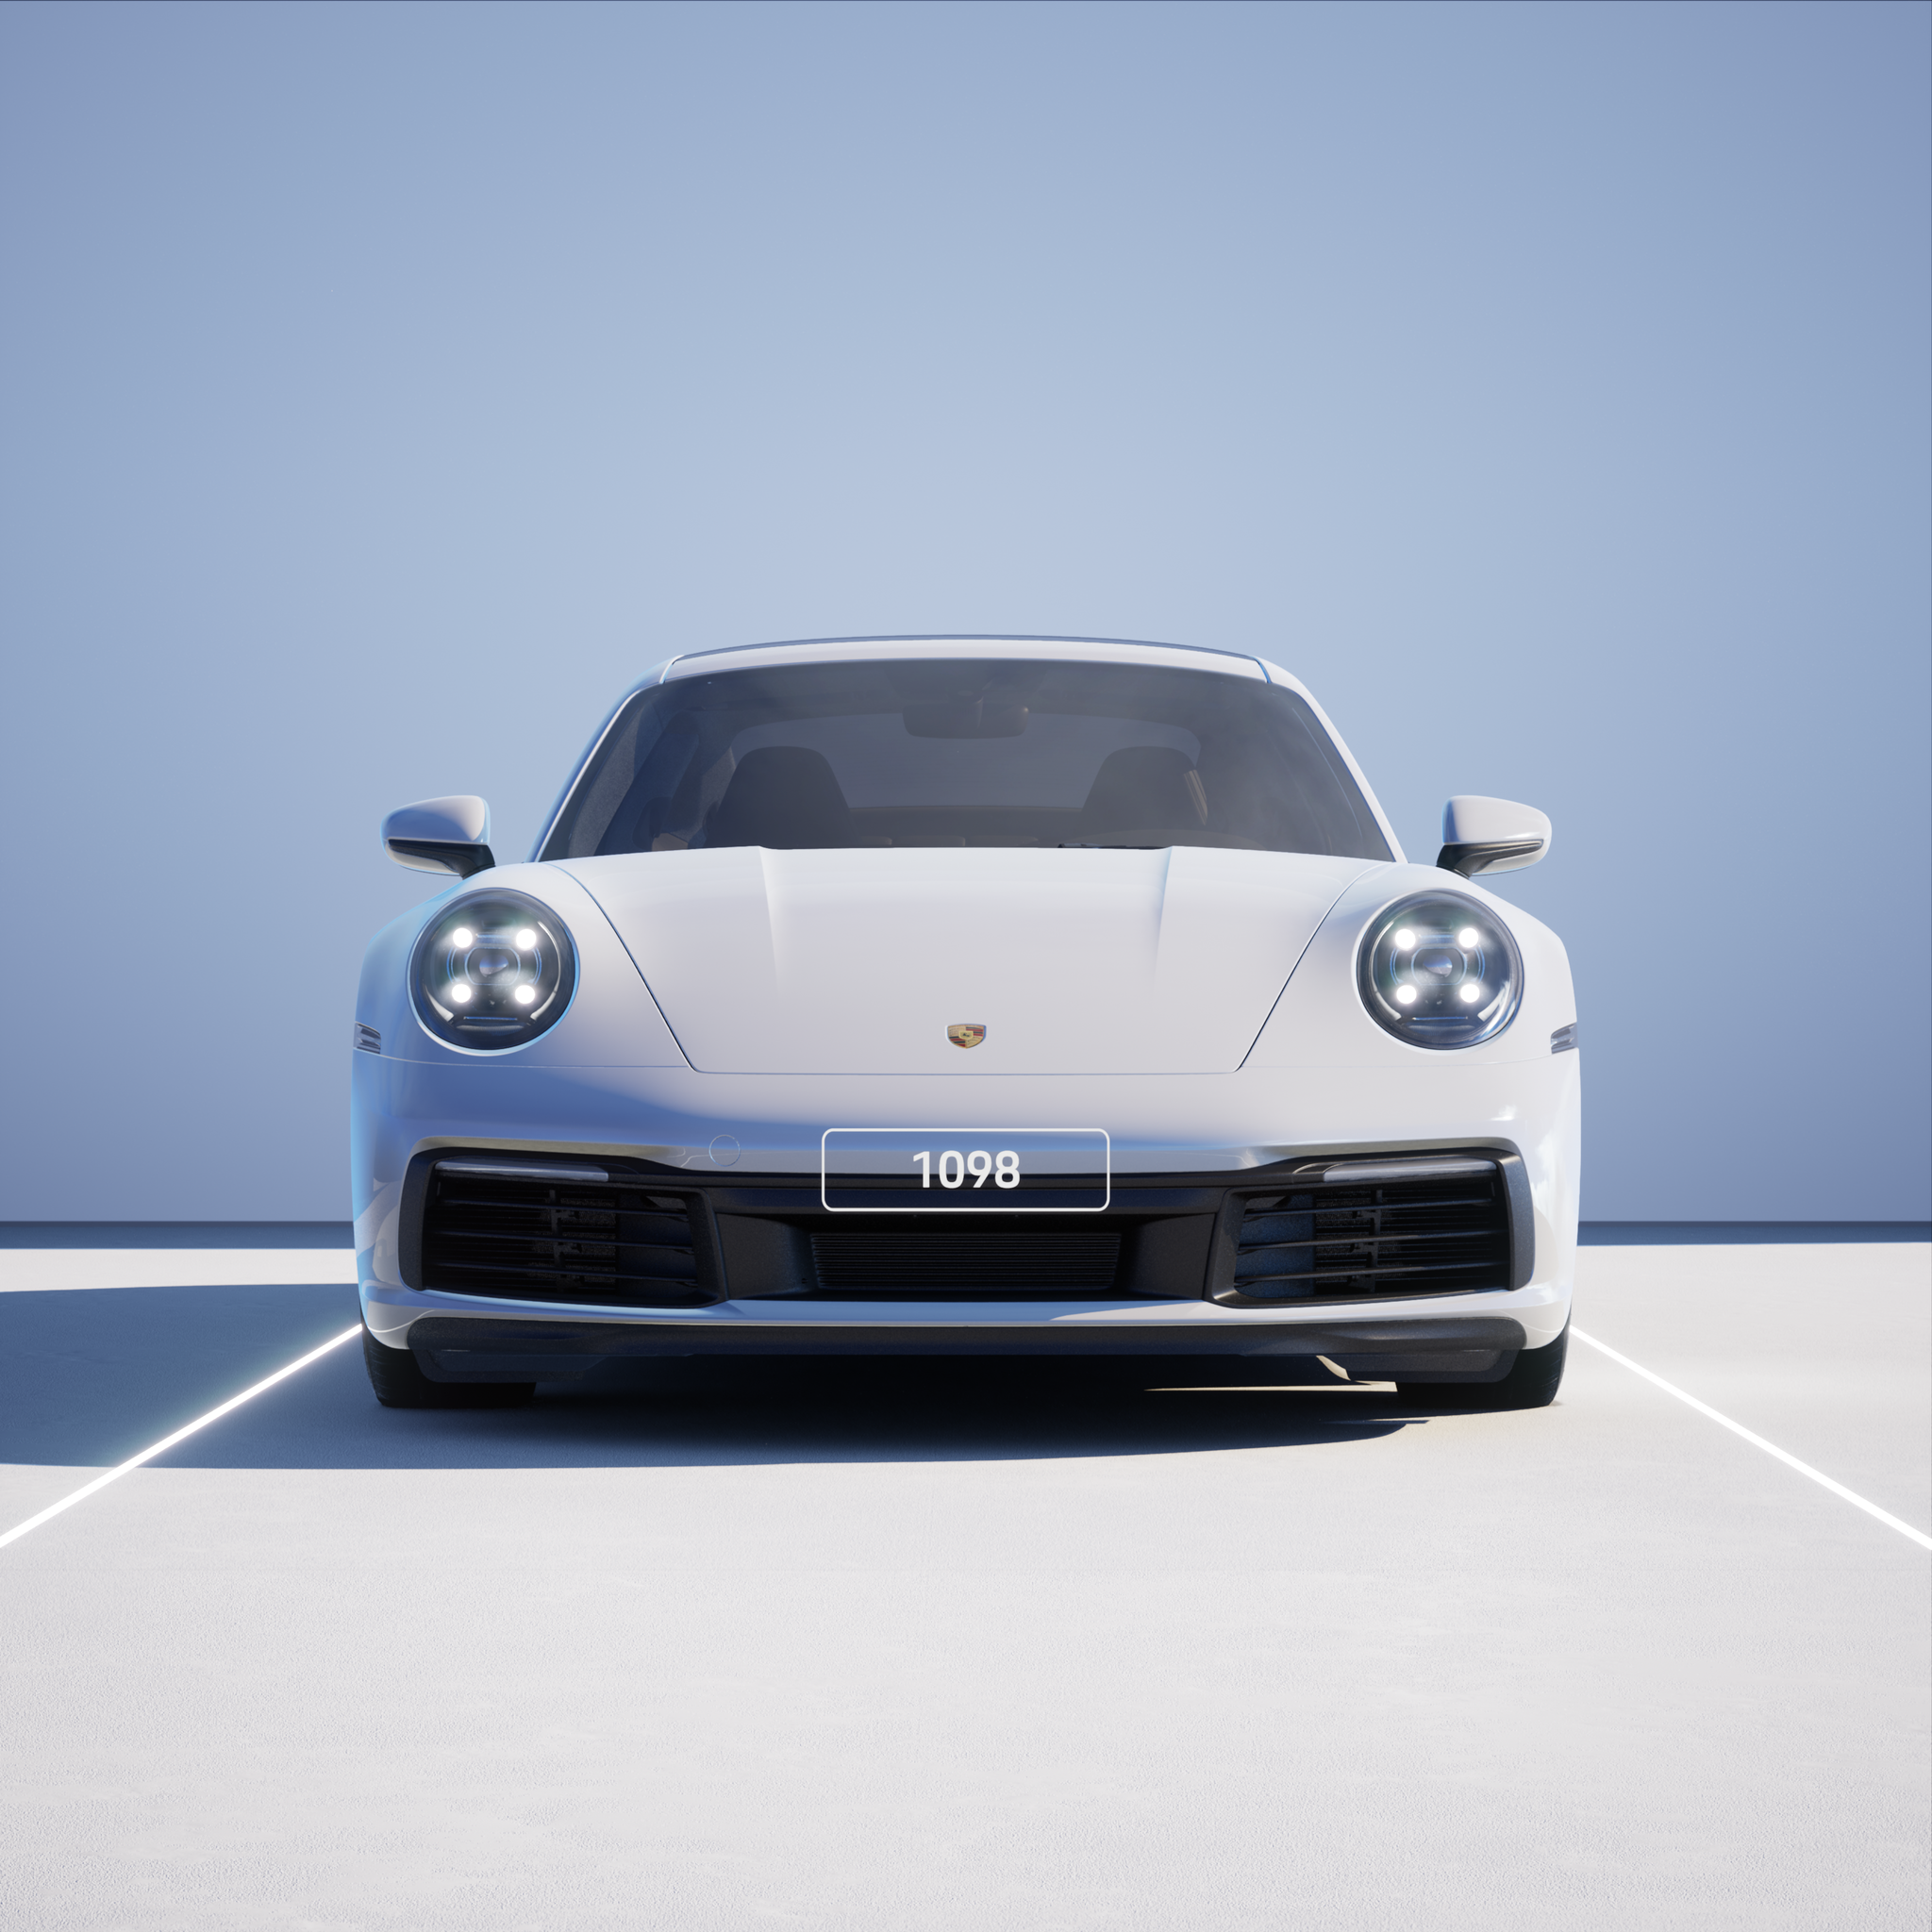 The PORSCHΞ 911 1098 image in phase